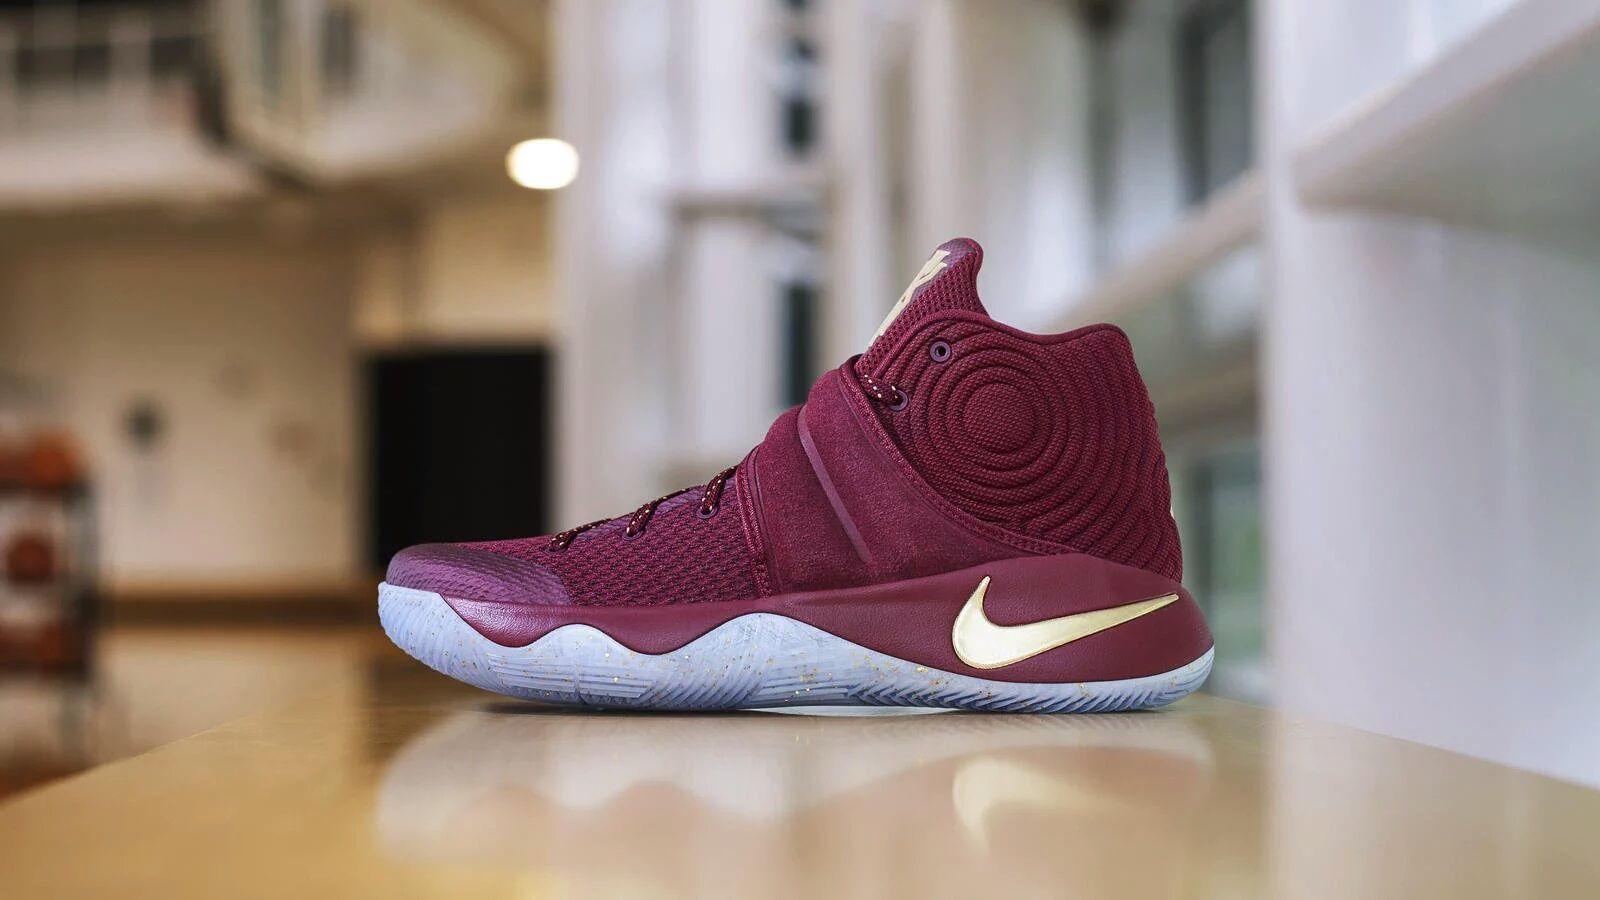 The shoes worn by Kyrie Irving in the 2016 NBA Finals